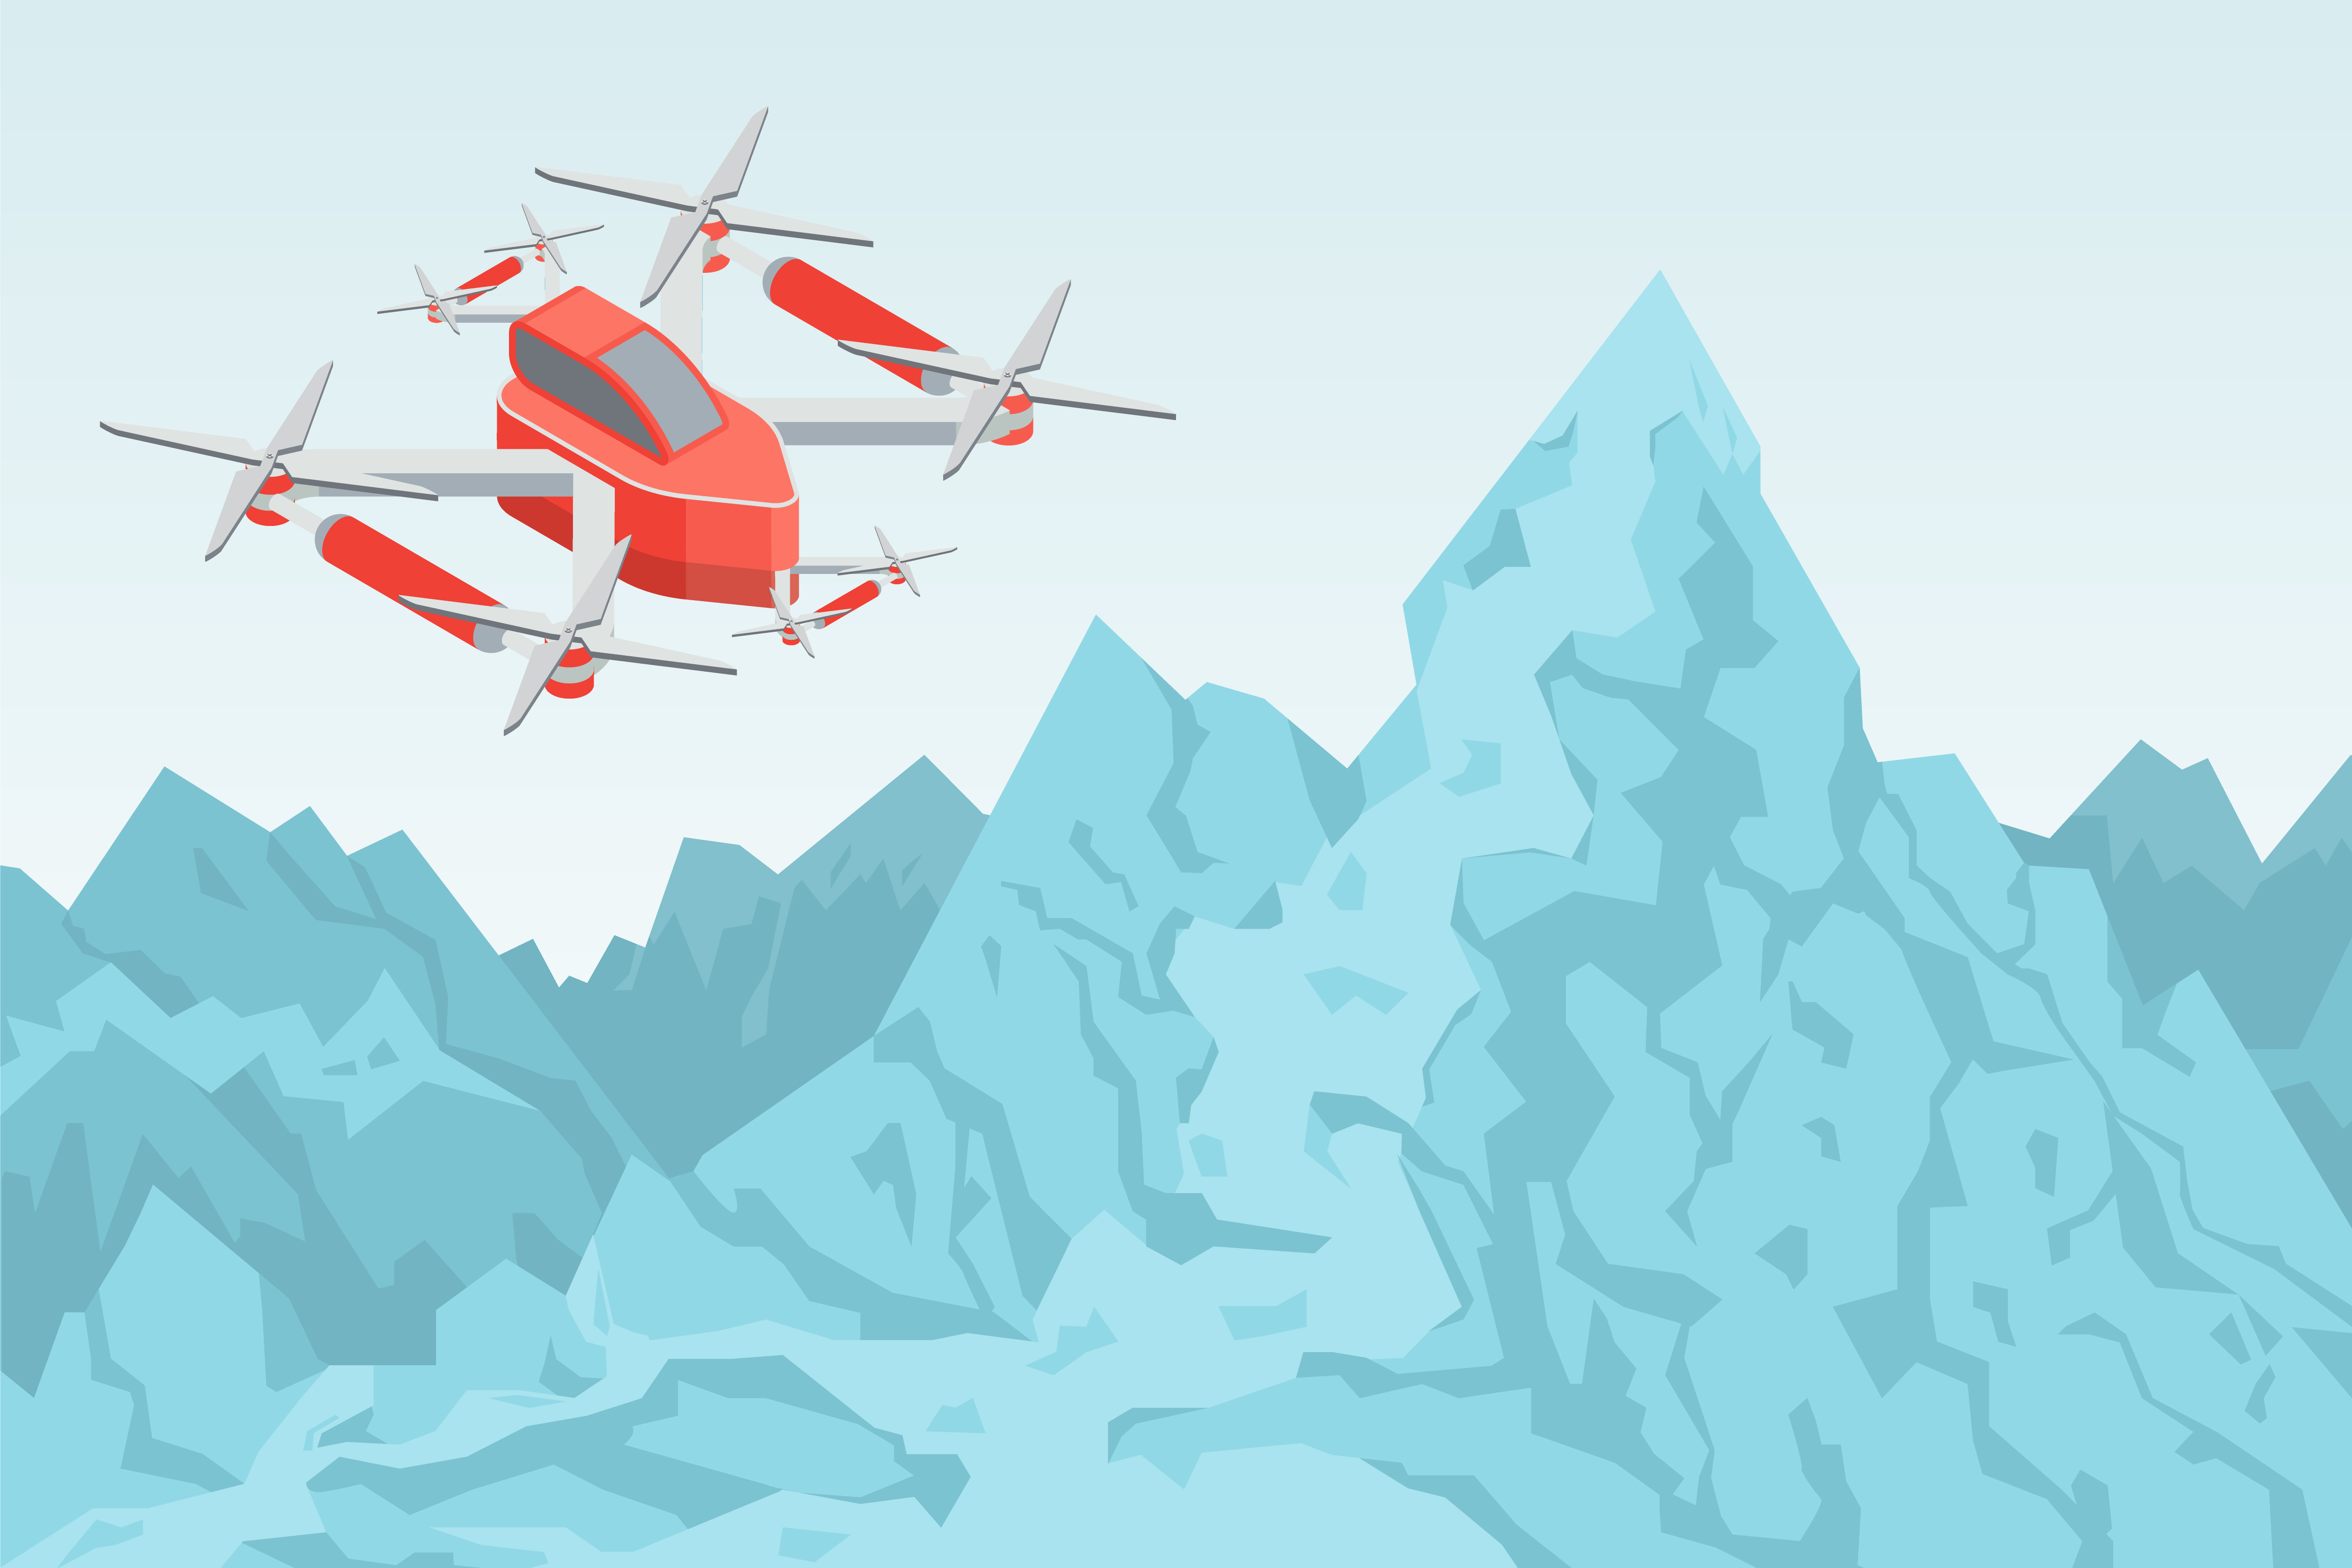 Helicopter or drone vector, aerial gadget flying over mountains range.Fflat style object with propeller and wings. Aviation and transportation of item, modern technologies. Copter flight illustration. Drone Flying Over Mountain Range Helicopter Vector